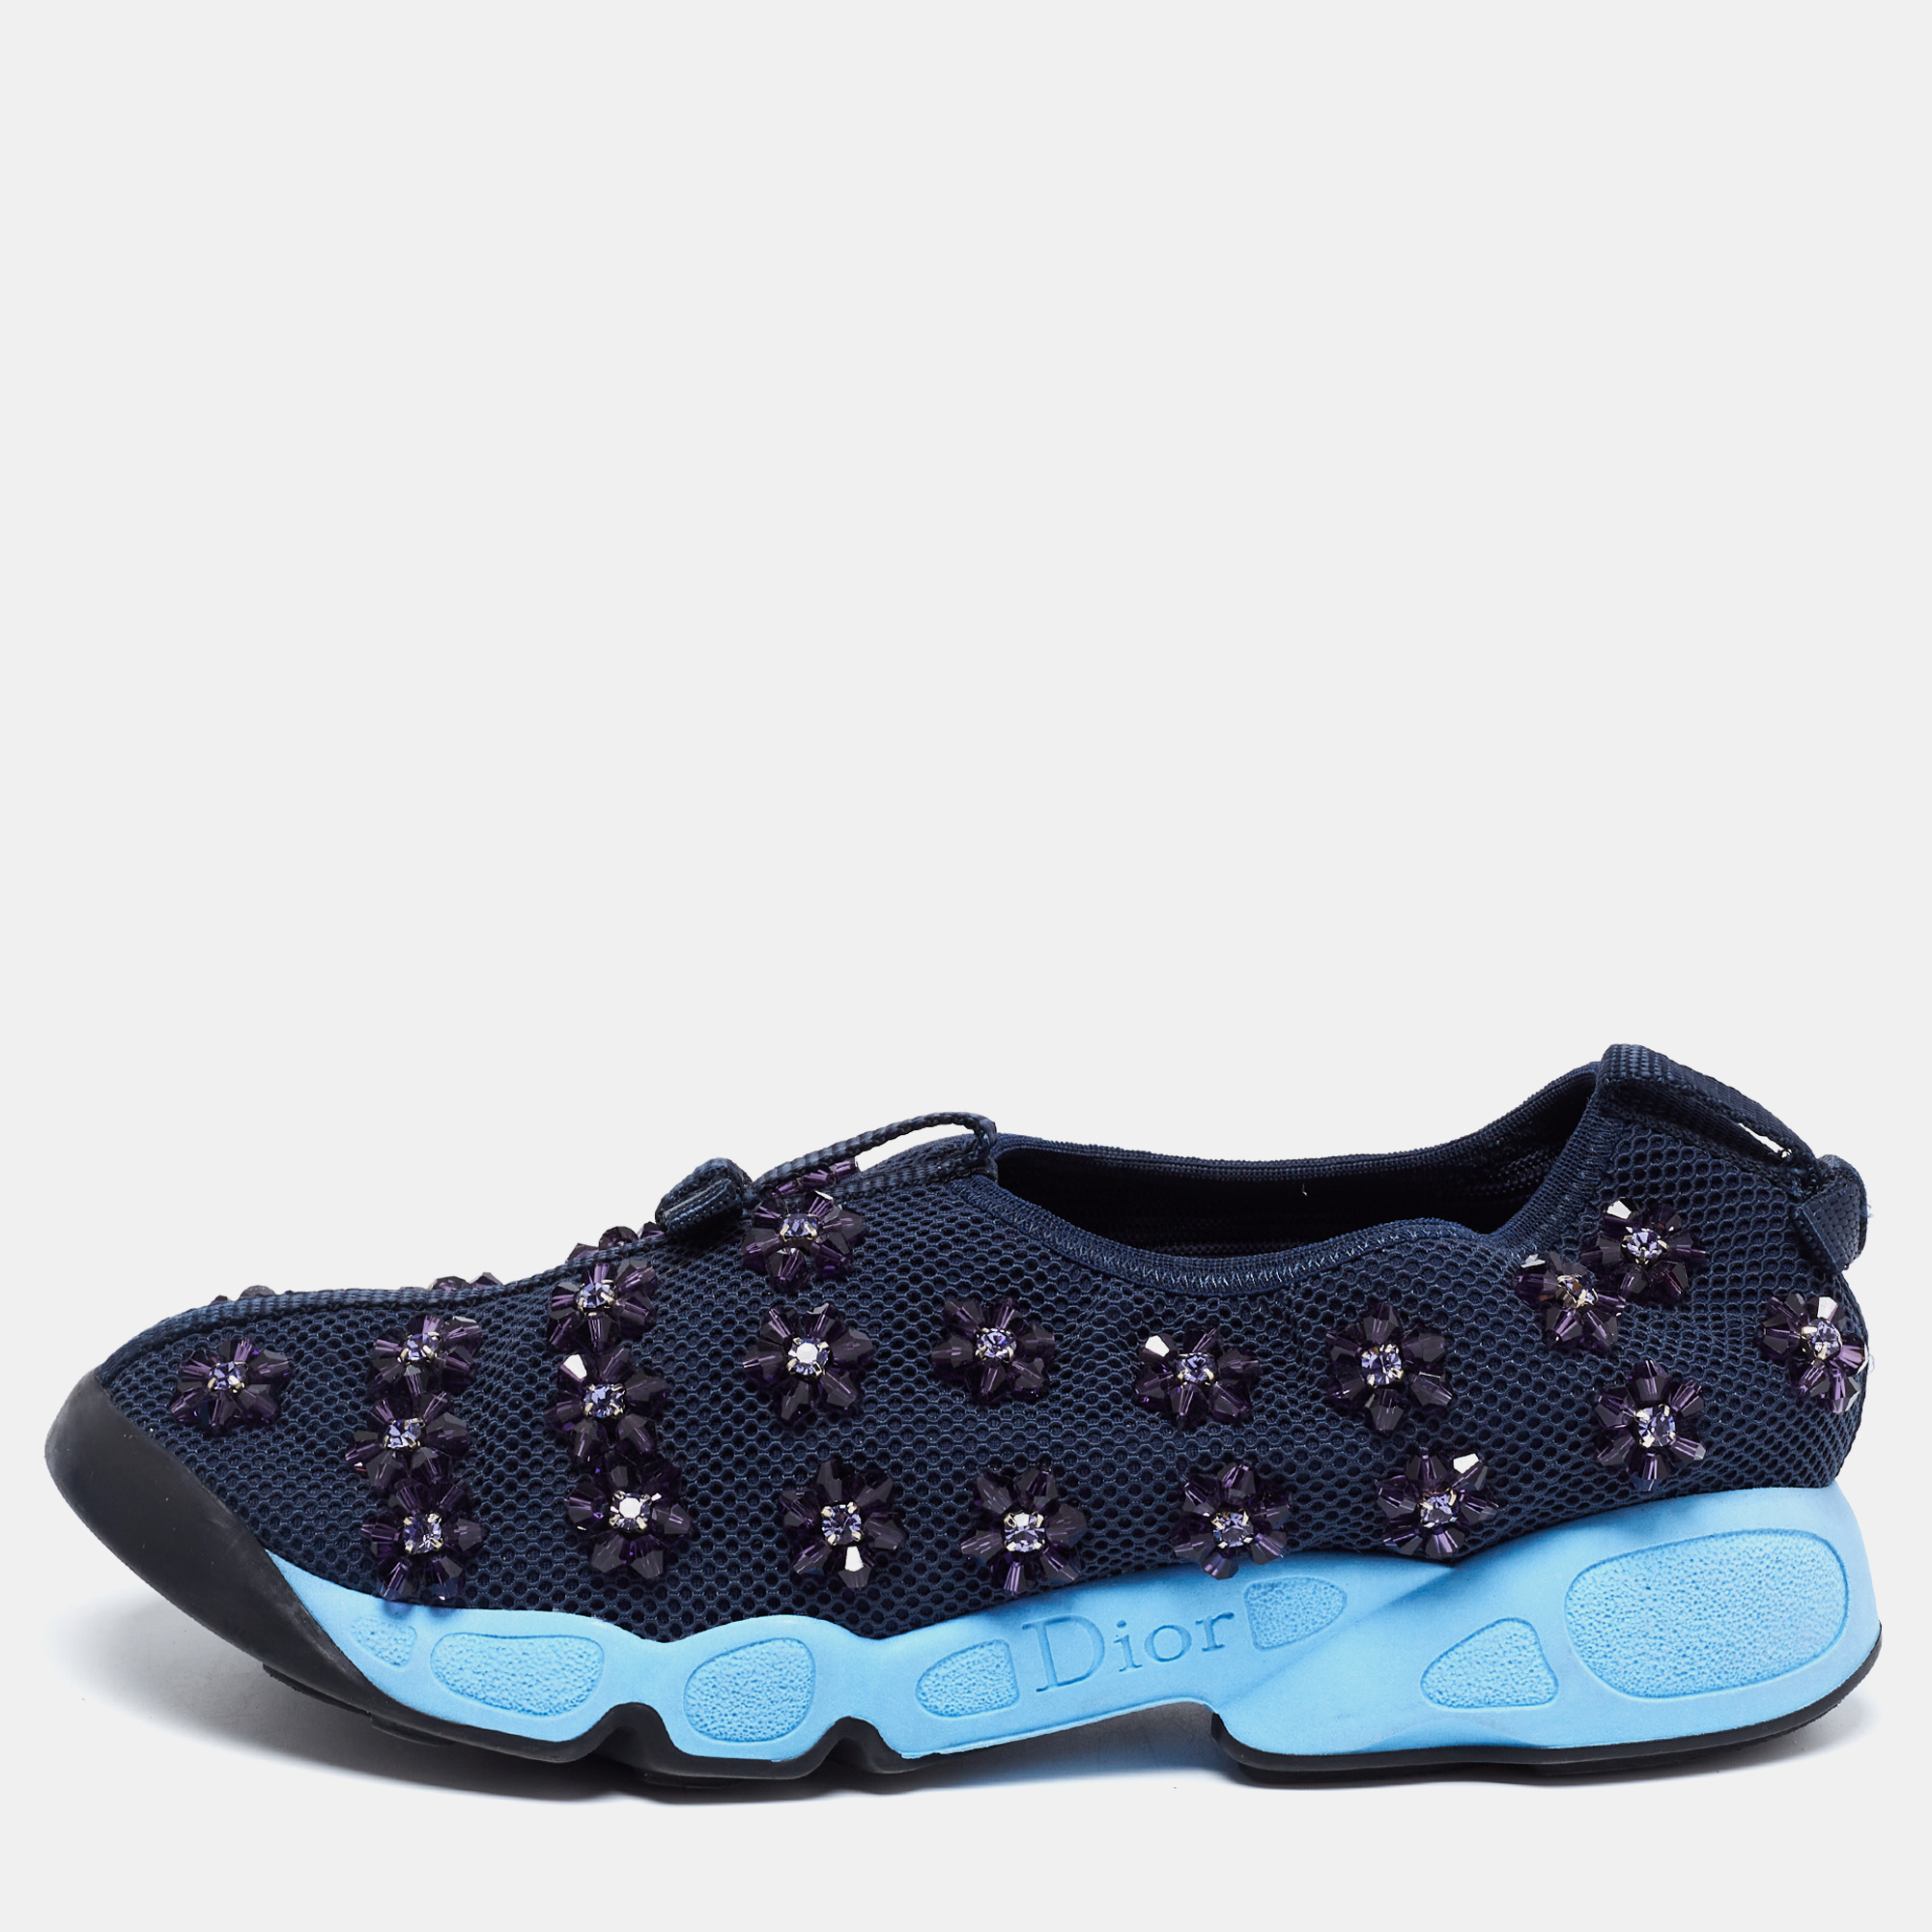 

Dior Navy Blue Mesh Fusion Floral Embellished Slip On Sneakers Size